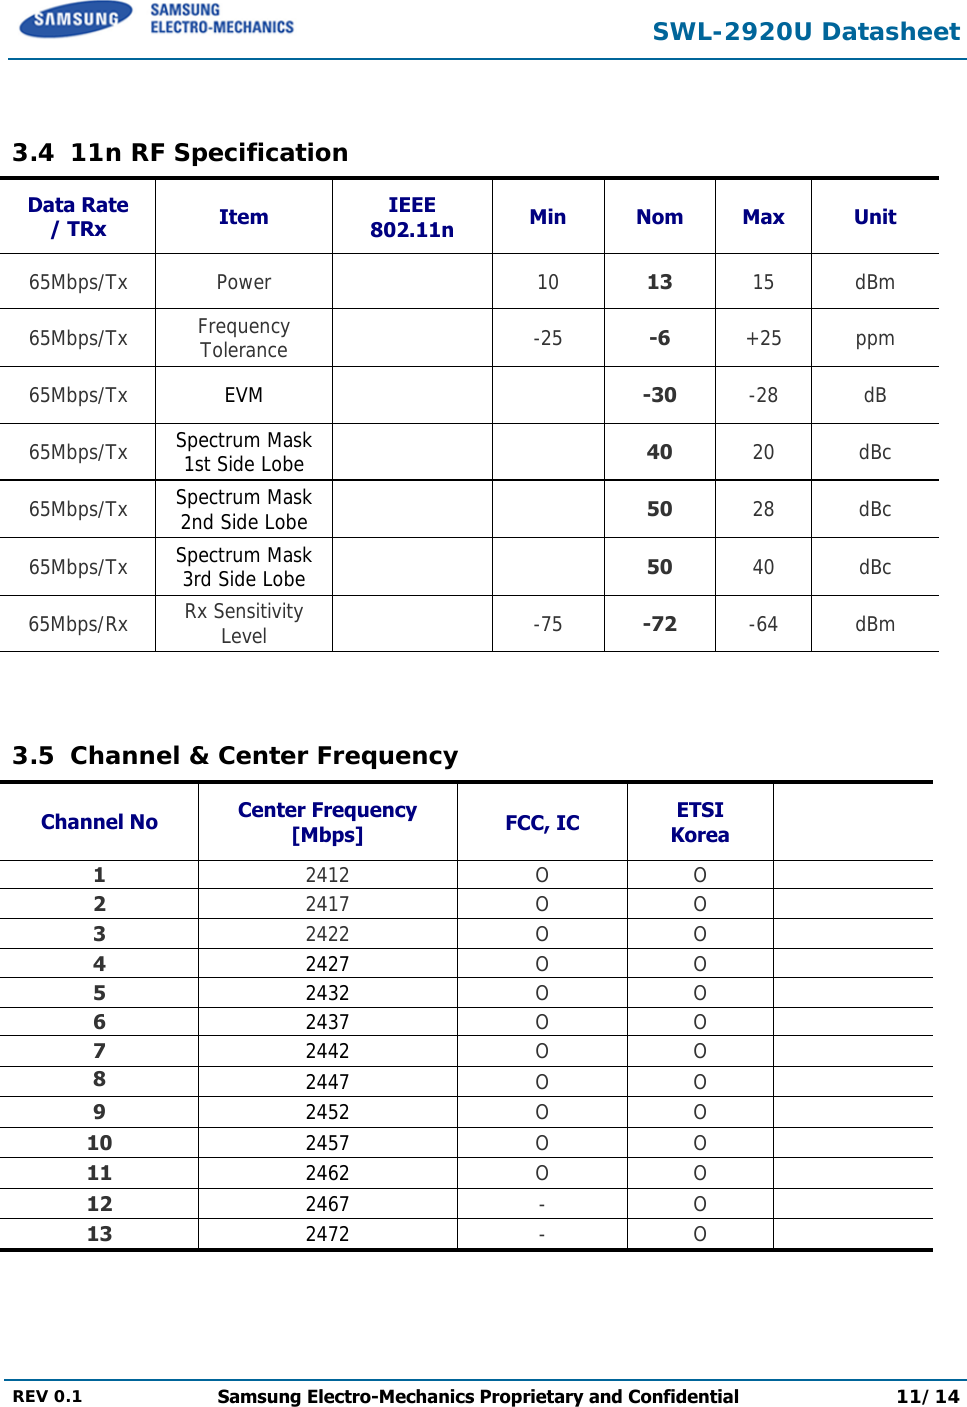  SWL-2920U Datasheet  REV 0.1  Samsung Electro-Mechanics Proprietary and Confidential 11/14   3.4 11n RF Specification  Data Rate / TRx  Item  IEEE 802.11n  Min Nom Max Unit 65Mbps/Tx Power  10 13  15 dBm 65Mbps/Tx Frequency Tolerance   -25 -6  +25 ppm 65Mbps/Tx EVM    -30  -28 dB 65Mbps/Tx Spectrum Mask 1st Side Lobe    40  20 dBc 65Mbps/Tx Spectrum Mask 2nd Side Lobe    50  28 dBc 65Mbps/Tx Spectrum Mask 3rd Side Lobe    50  40 dBc 65Mbps/Rx  Rx Sensitivity Level  -75 -72  -64 dBm   3.5  Channel &amp; Center Frequency Channel No  Center Frequency [Mbps]  FCC, IC  ETSI Korea   1 2412 O O  2 2417 O O  3 2422 O O  4 2427  O O  5 2432  O O  6 2437  O O  7 2442  O O  8  2447  O O  9  2452  O O  10  2457  O O  11  2462  O O  12  2467  - O  13  2472  - O  